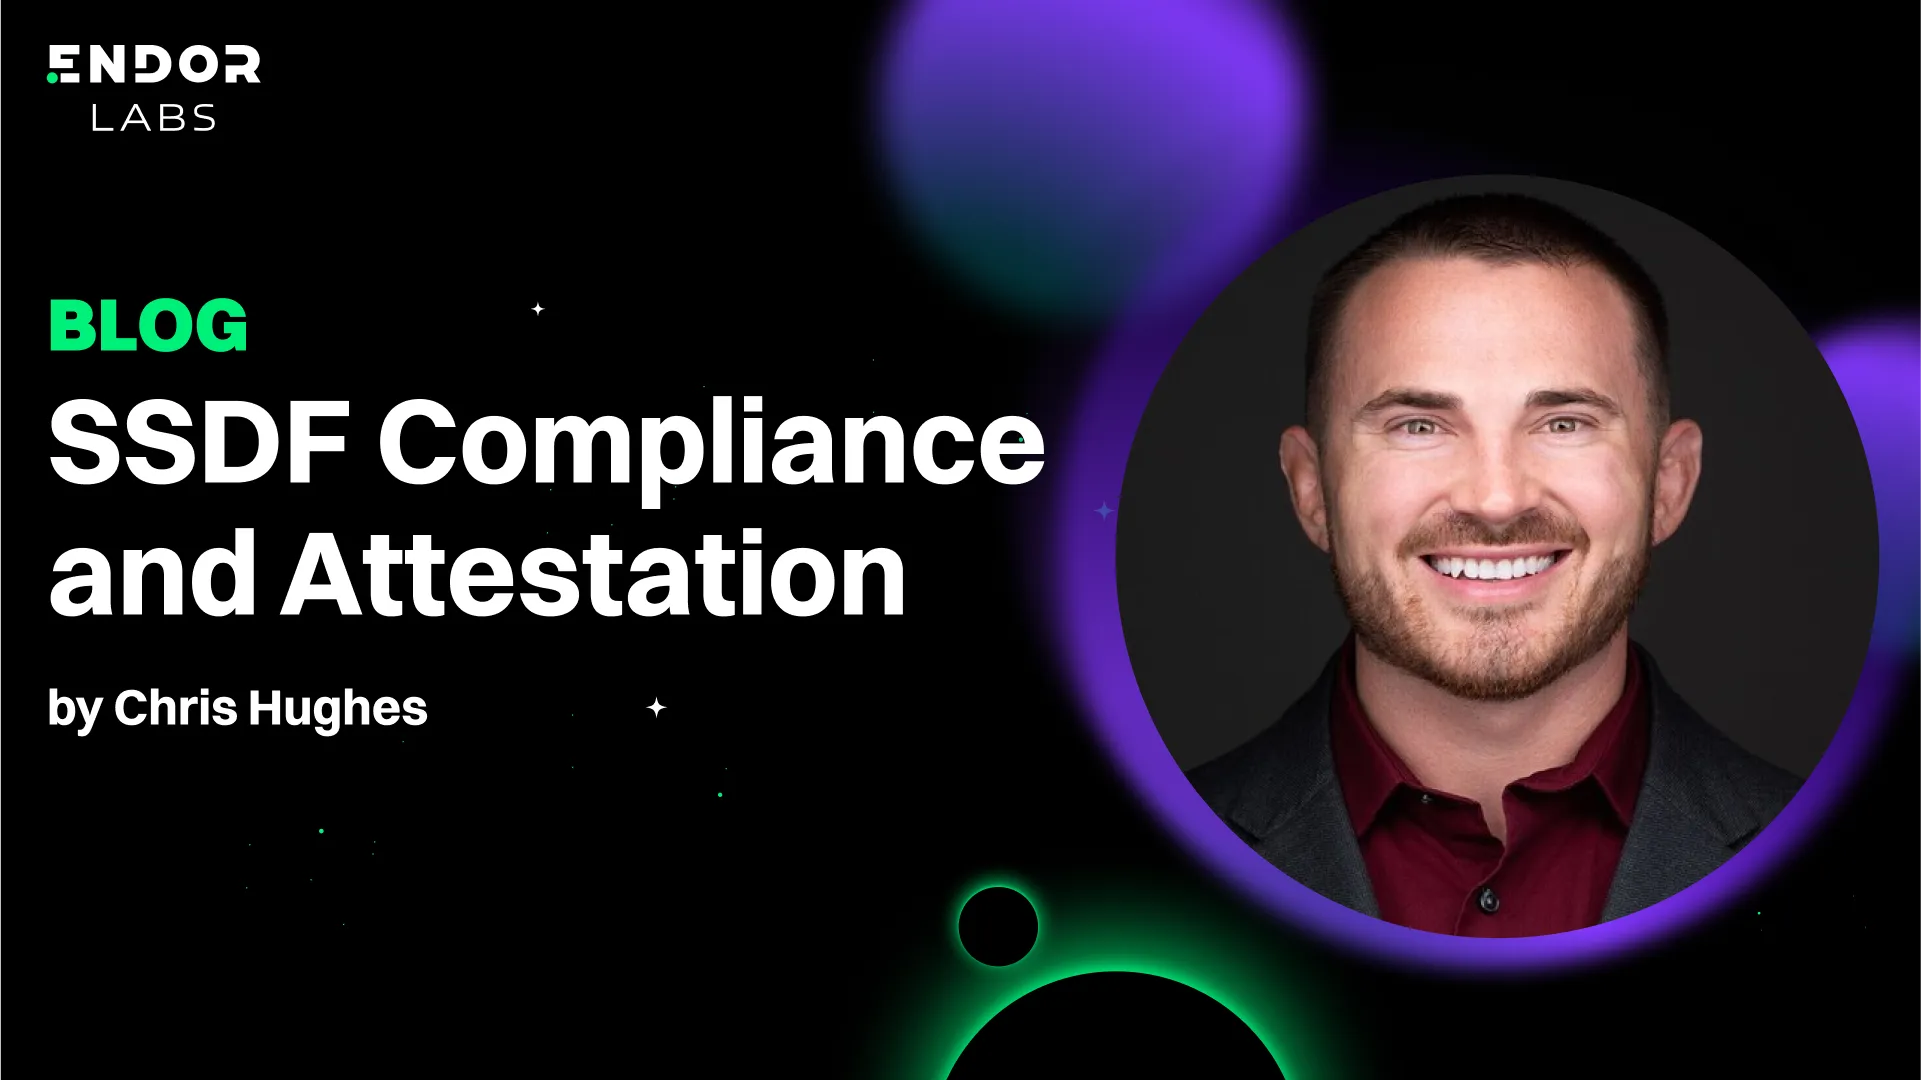 SSDF Compliance and Attestation by Chris Hughes